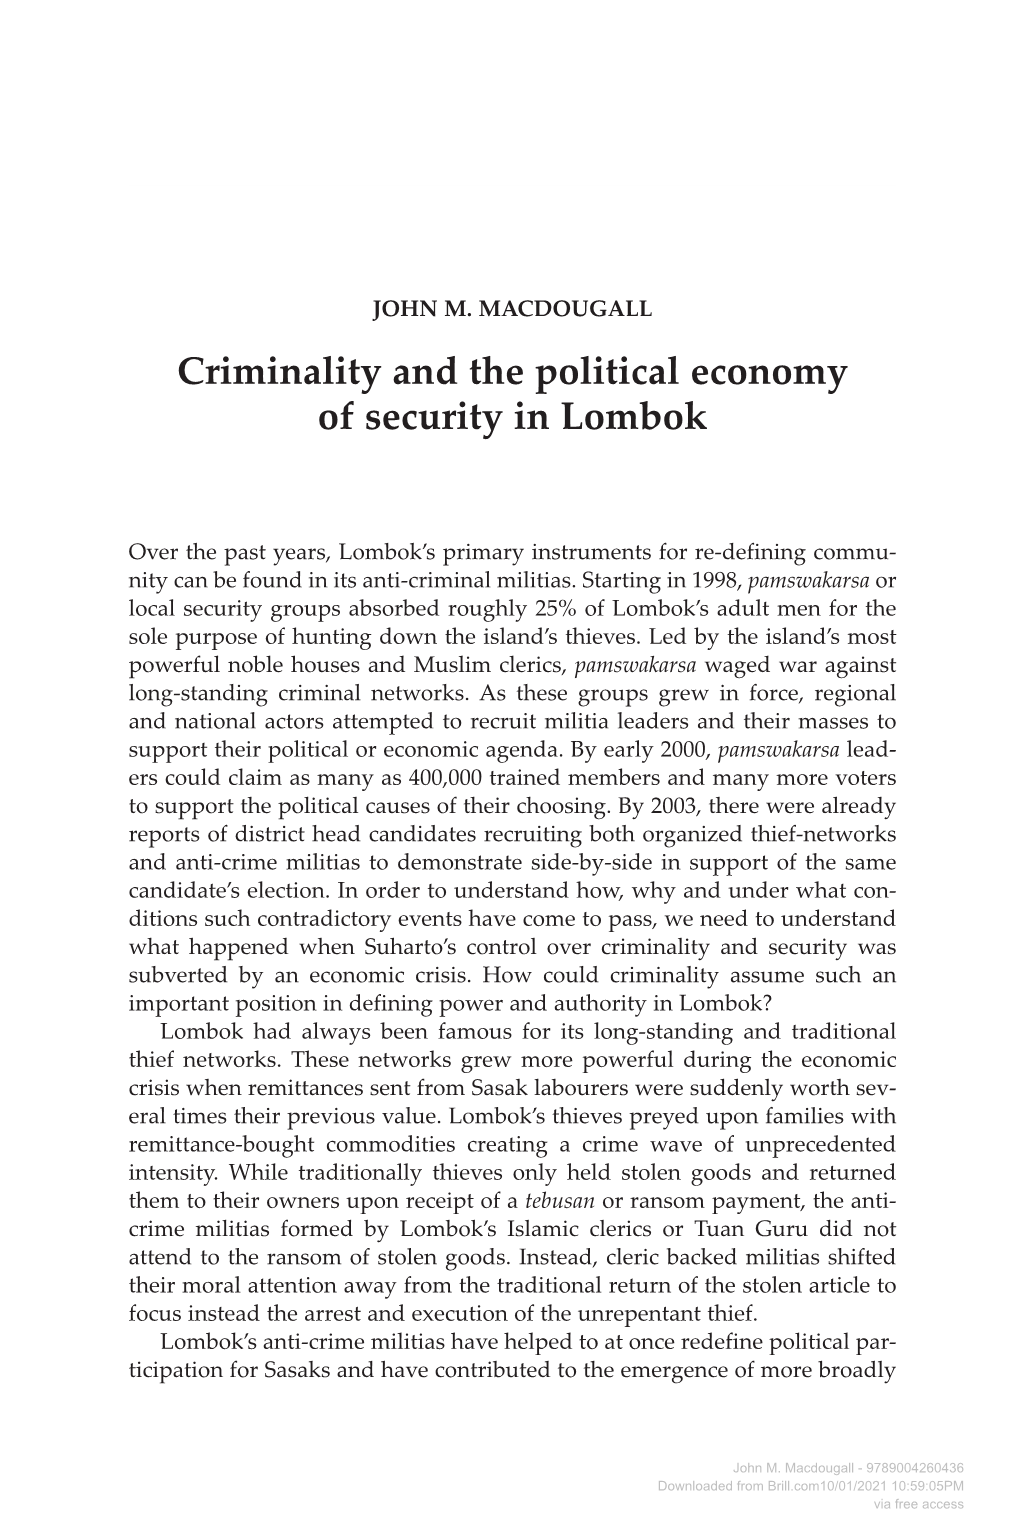 Criminality and the Political Economy of Security in Lombok